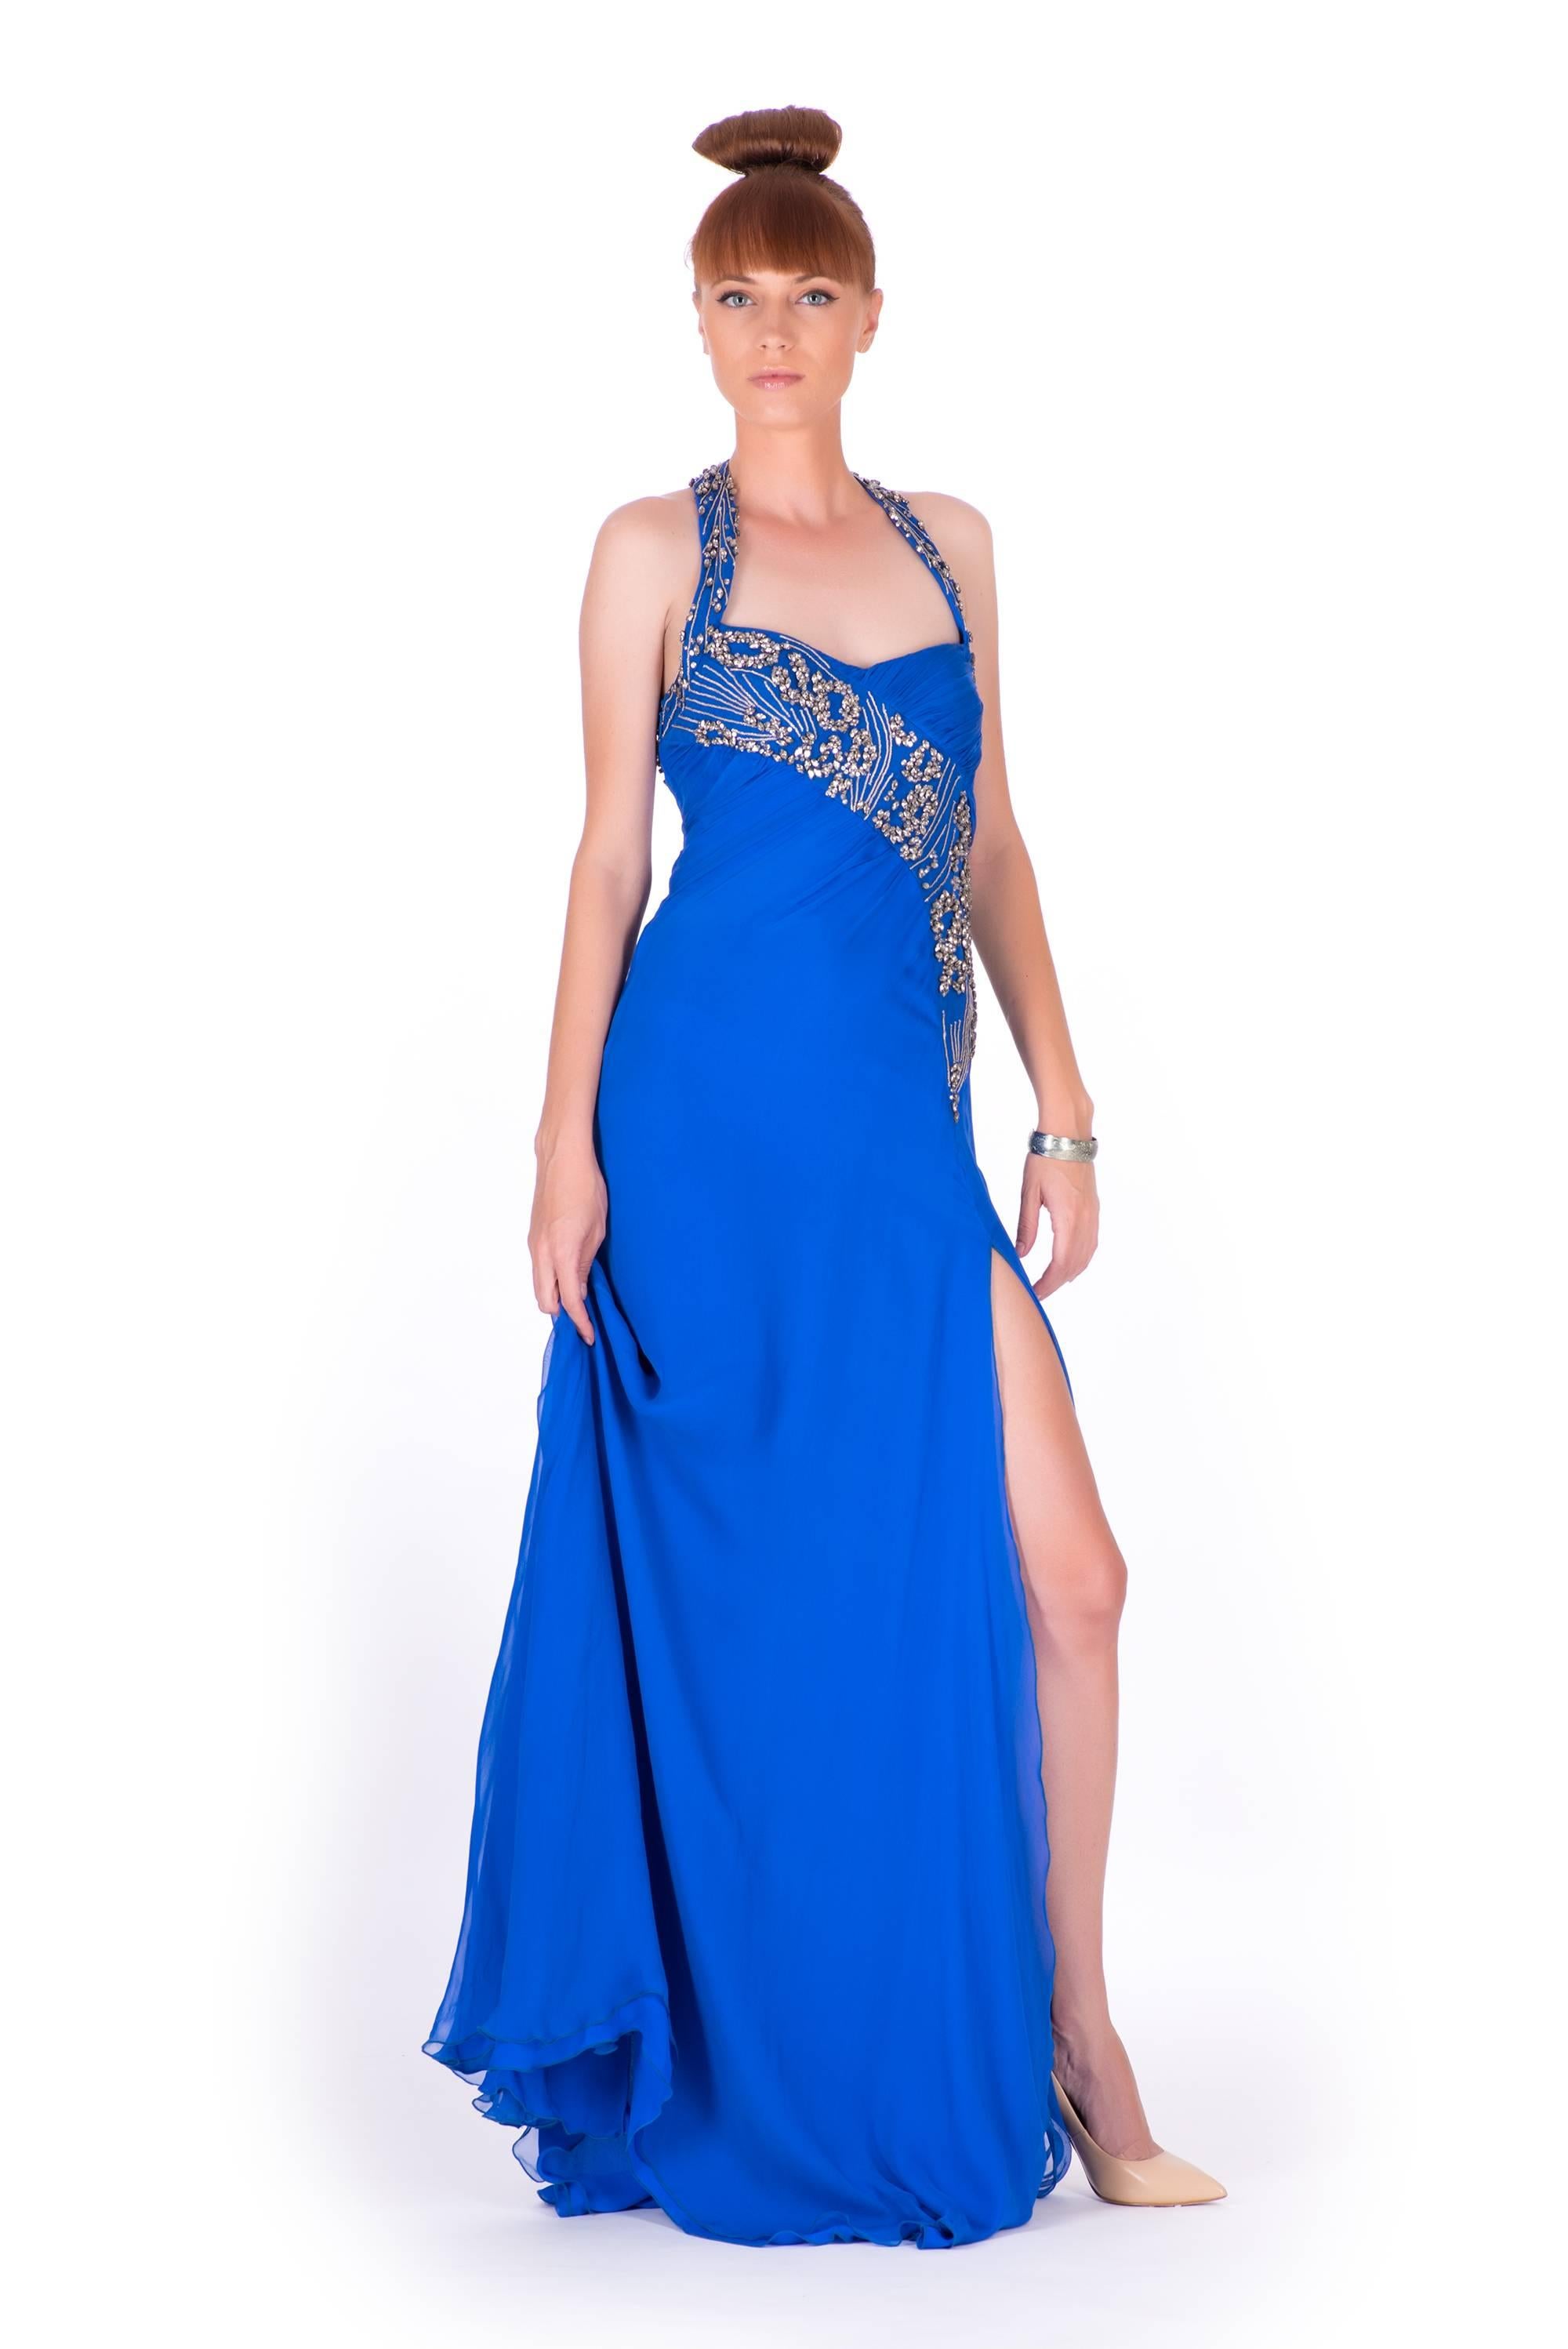 New VERSACE EMBELLISHED ROYAL BLUE
CHIFFON SILK GOWN

Impress at any formal function with this elegant
creation by Versace. The royal blue dress was
fashioned in Italy with luxurious silk chiffon. An
artfully embellished body with an open back,